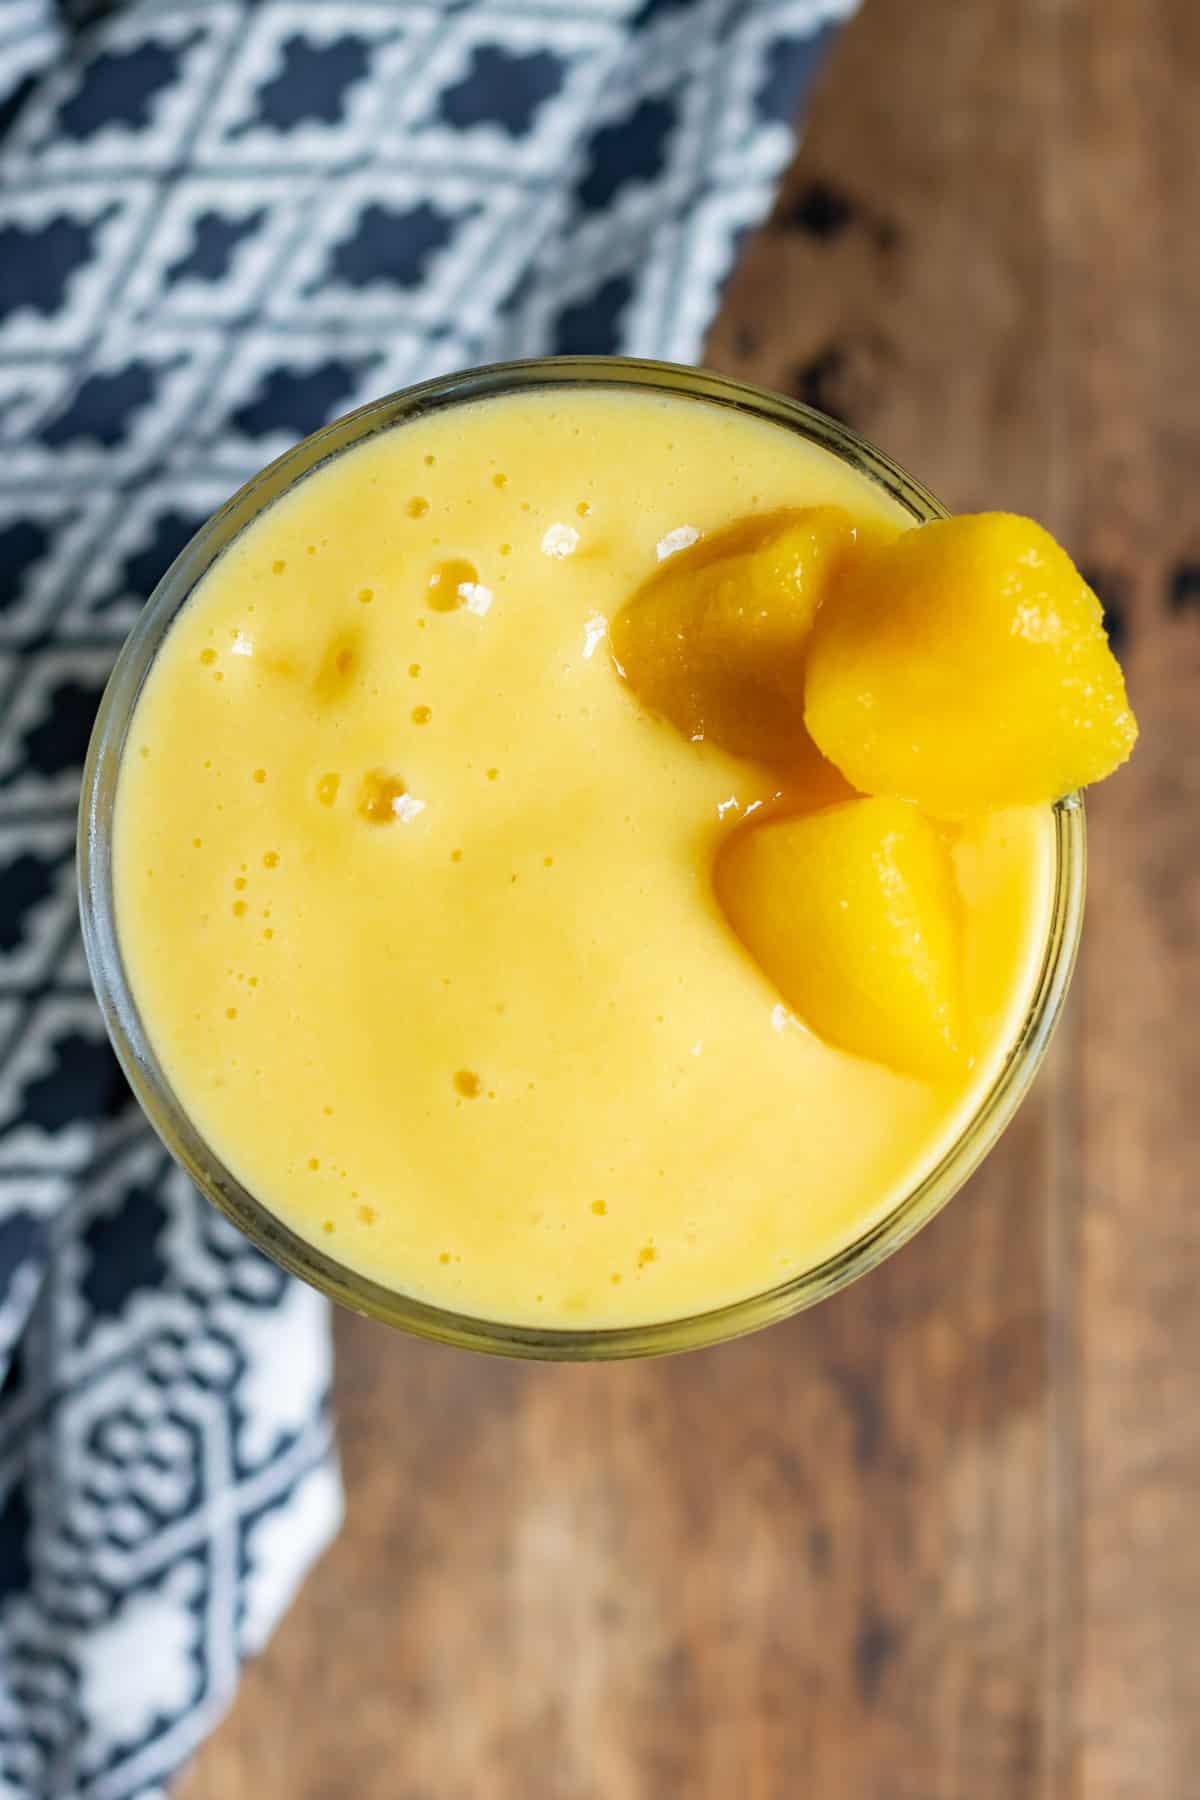 Looking down at a glass of smoothie with mango chunks to garnish.